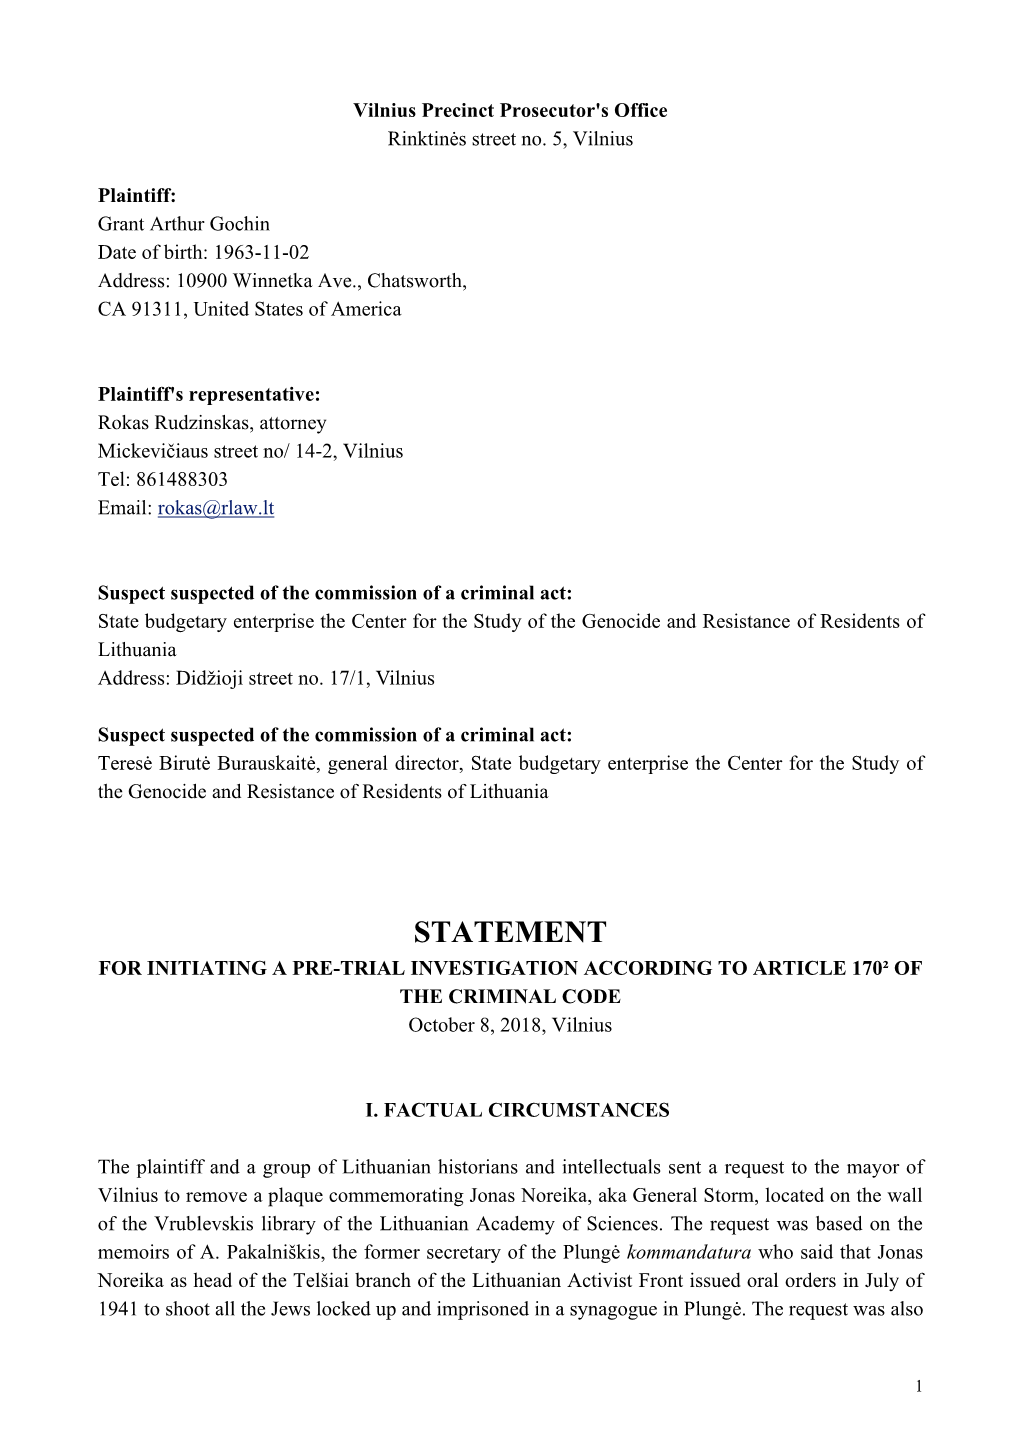 STATEMENT for INITIATING a PRE-TRIAL INVESTIGATION ACCORDING to ARTICLE 170² of the CRIMINAL CODE October 8, 2018, Vilnius